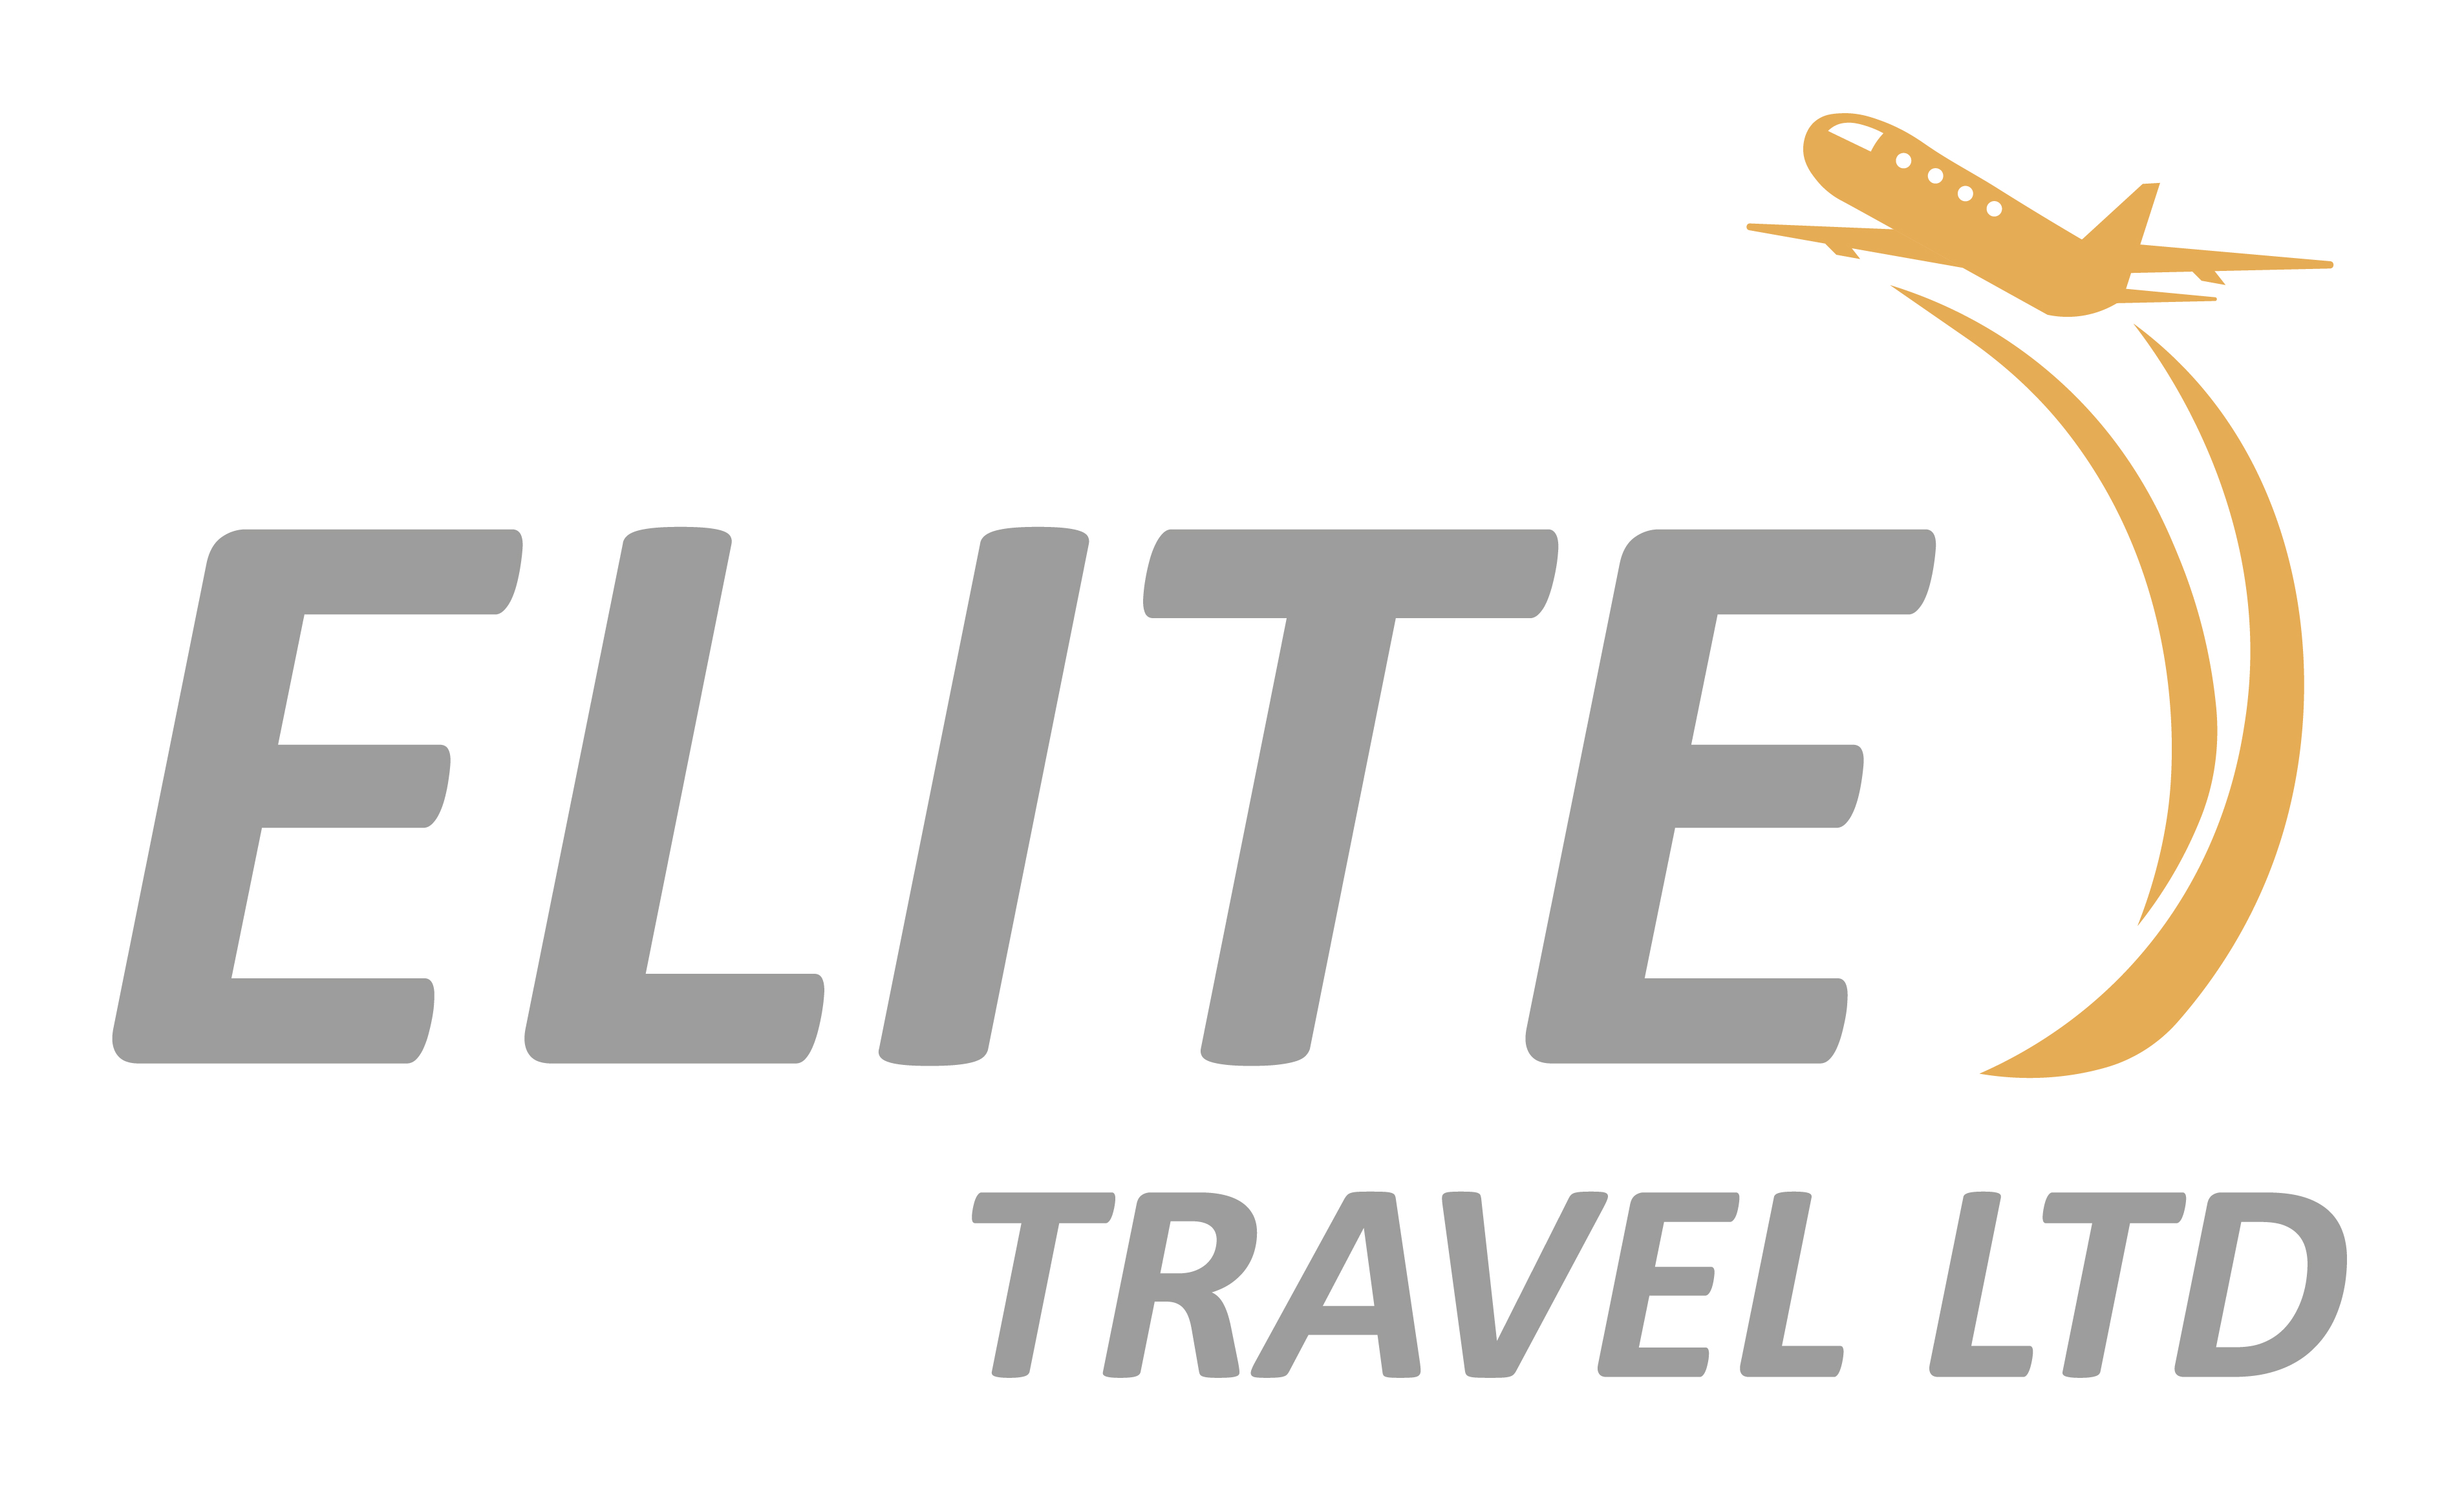 Logo of Elite Travel Ltd Airport Transfer And Transportation Services In Ipswich, Suffolk